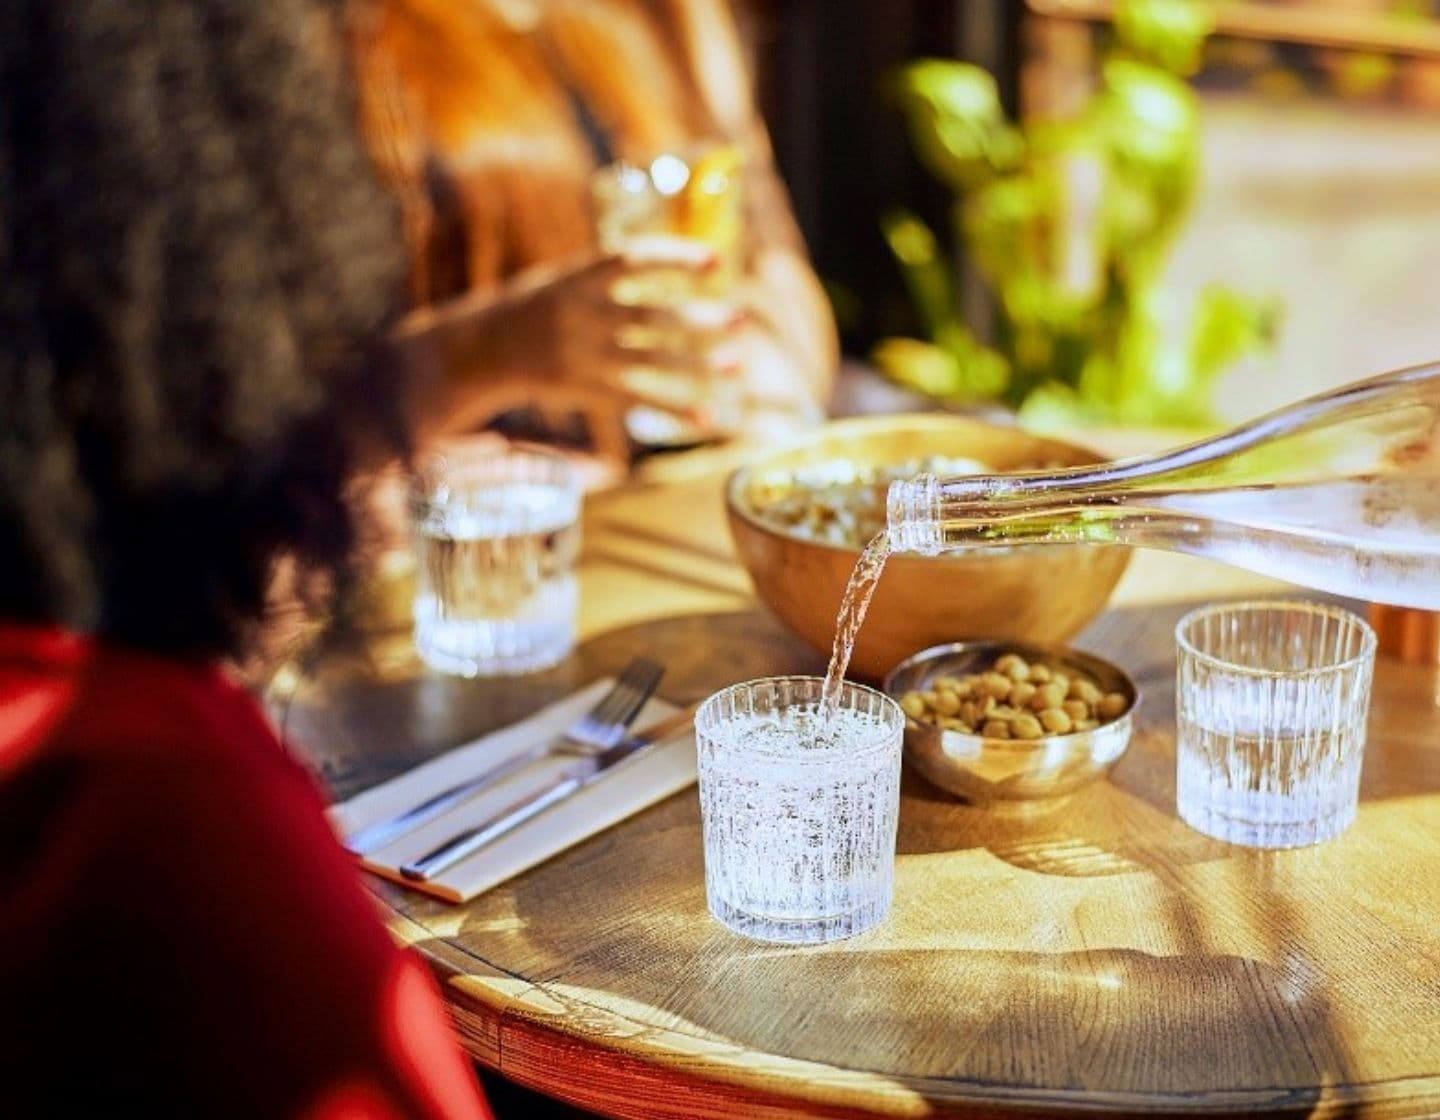 Drink being poured into a clear glass with food and small plates on the table